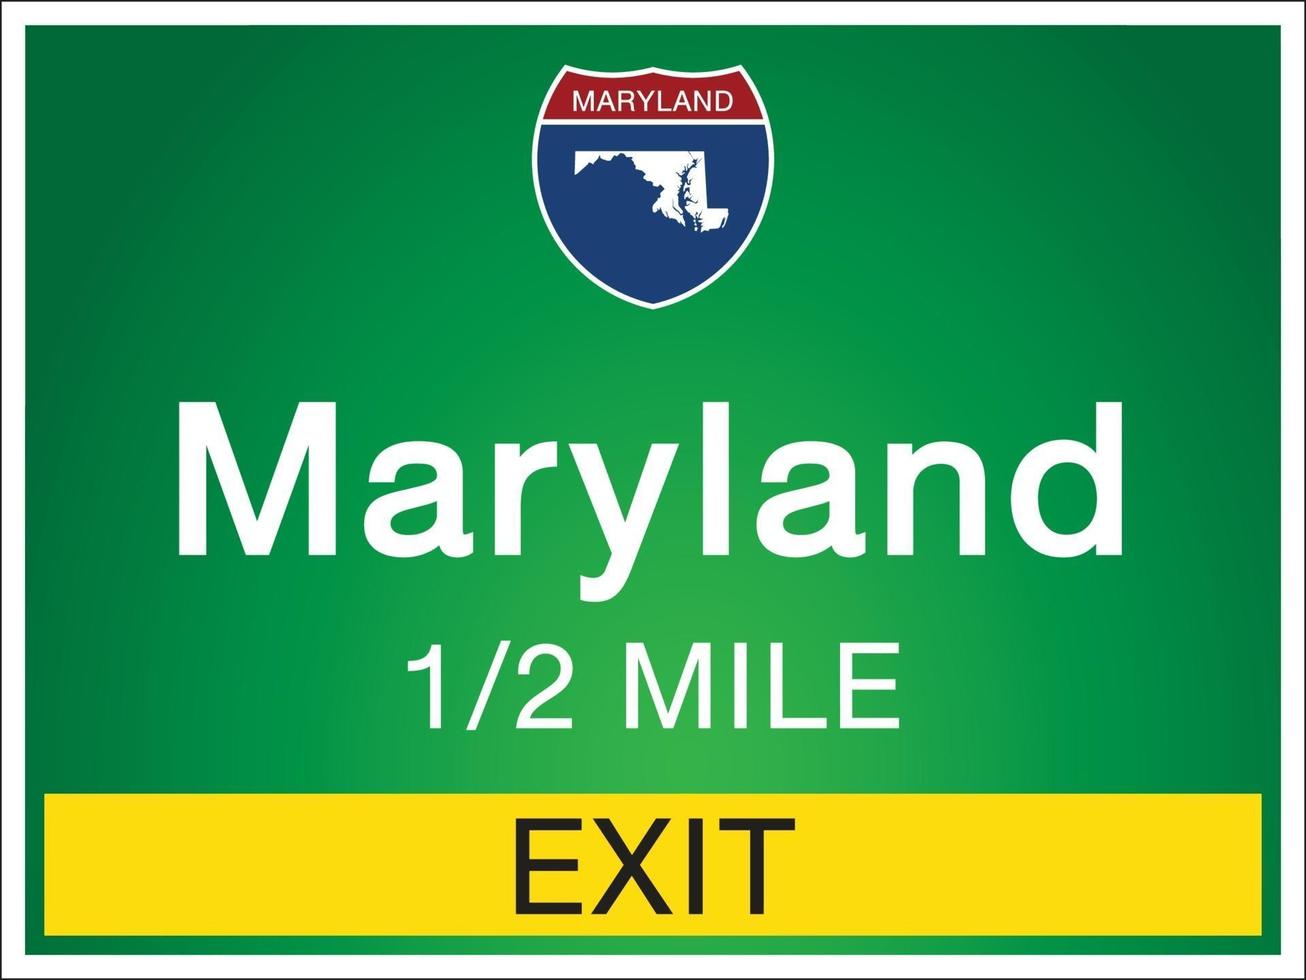 Signage on the highway in Maryland state information and maps vector